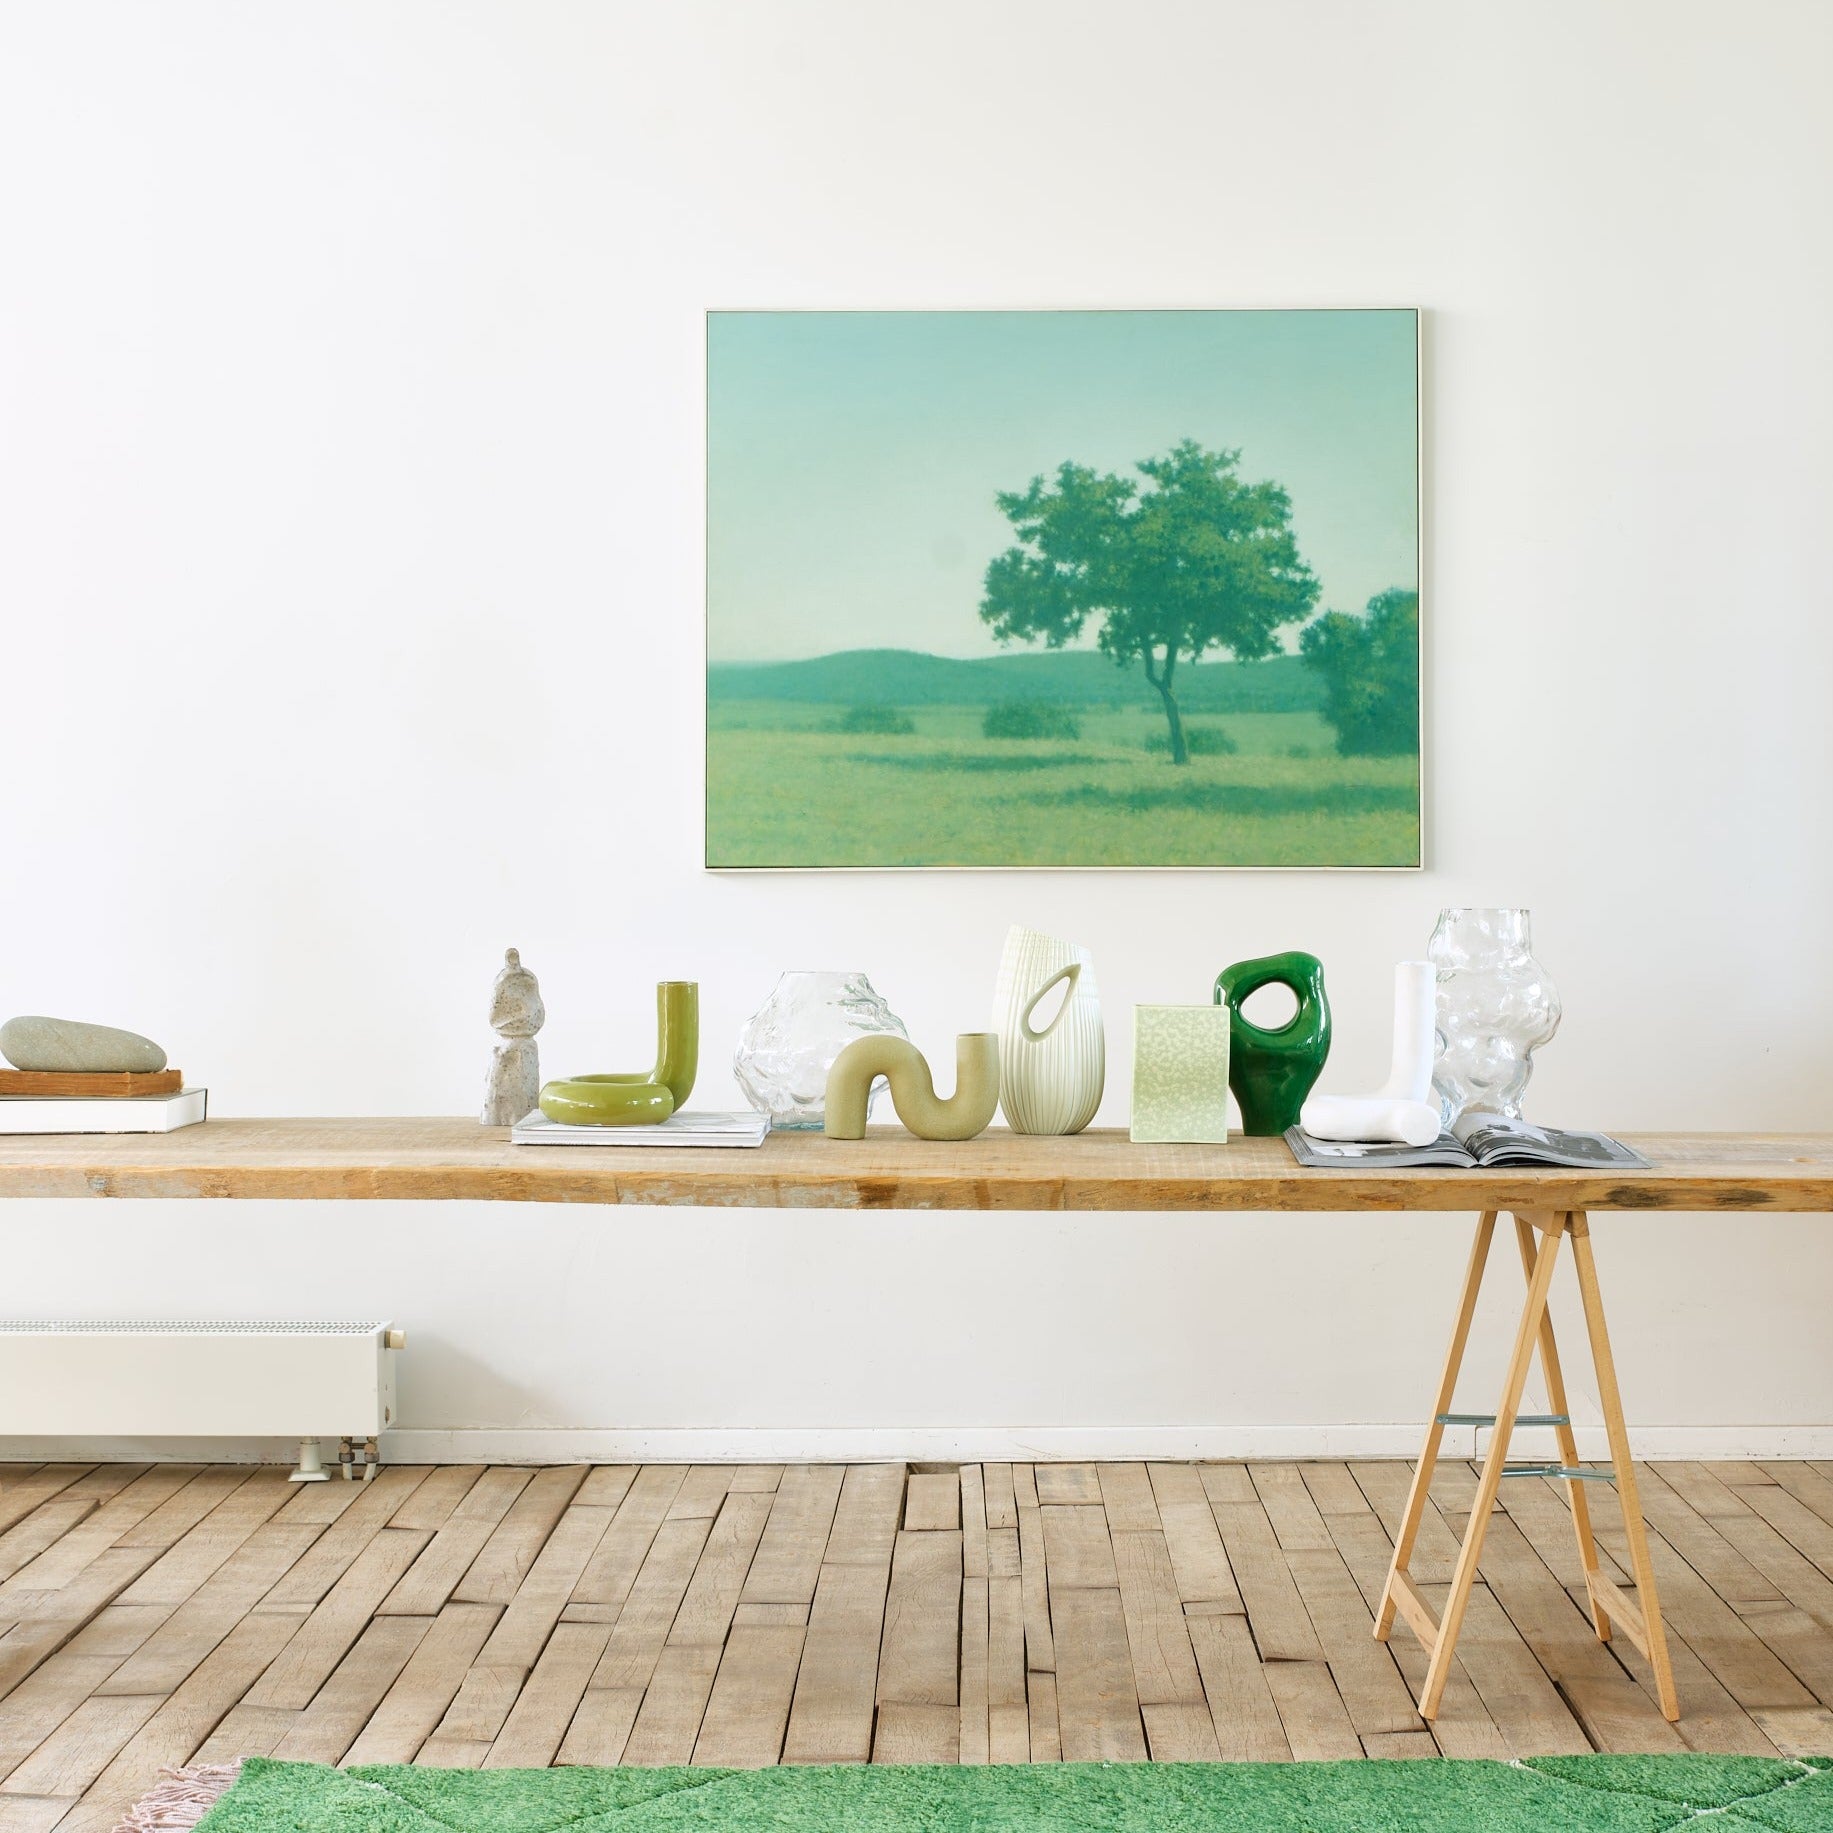 green objects and vases on a wooden trestle table